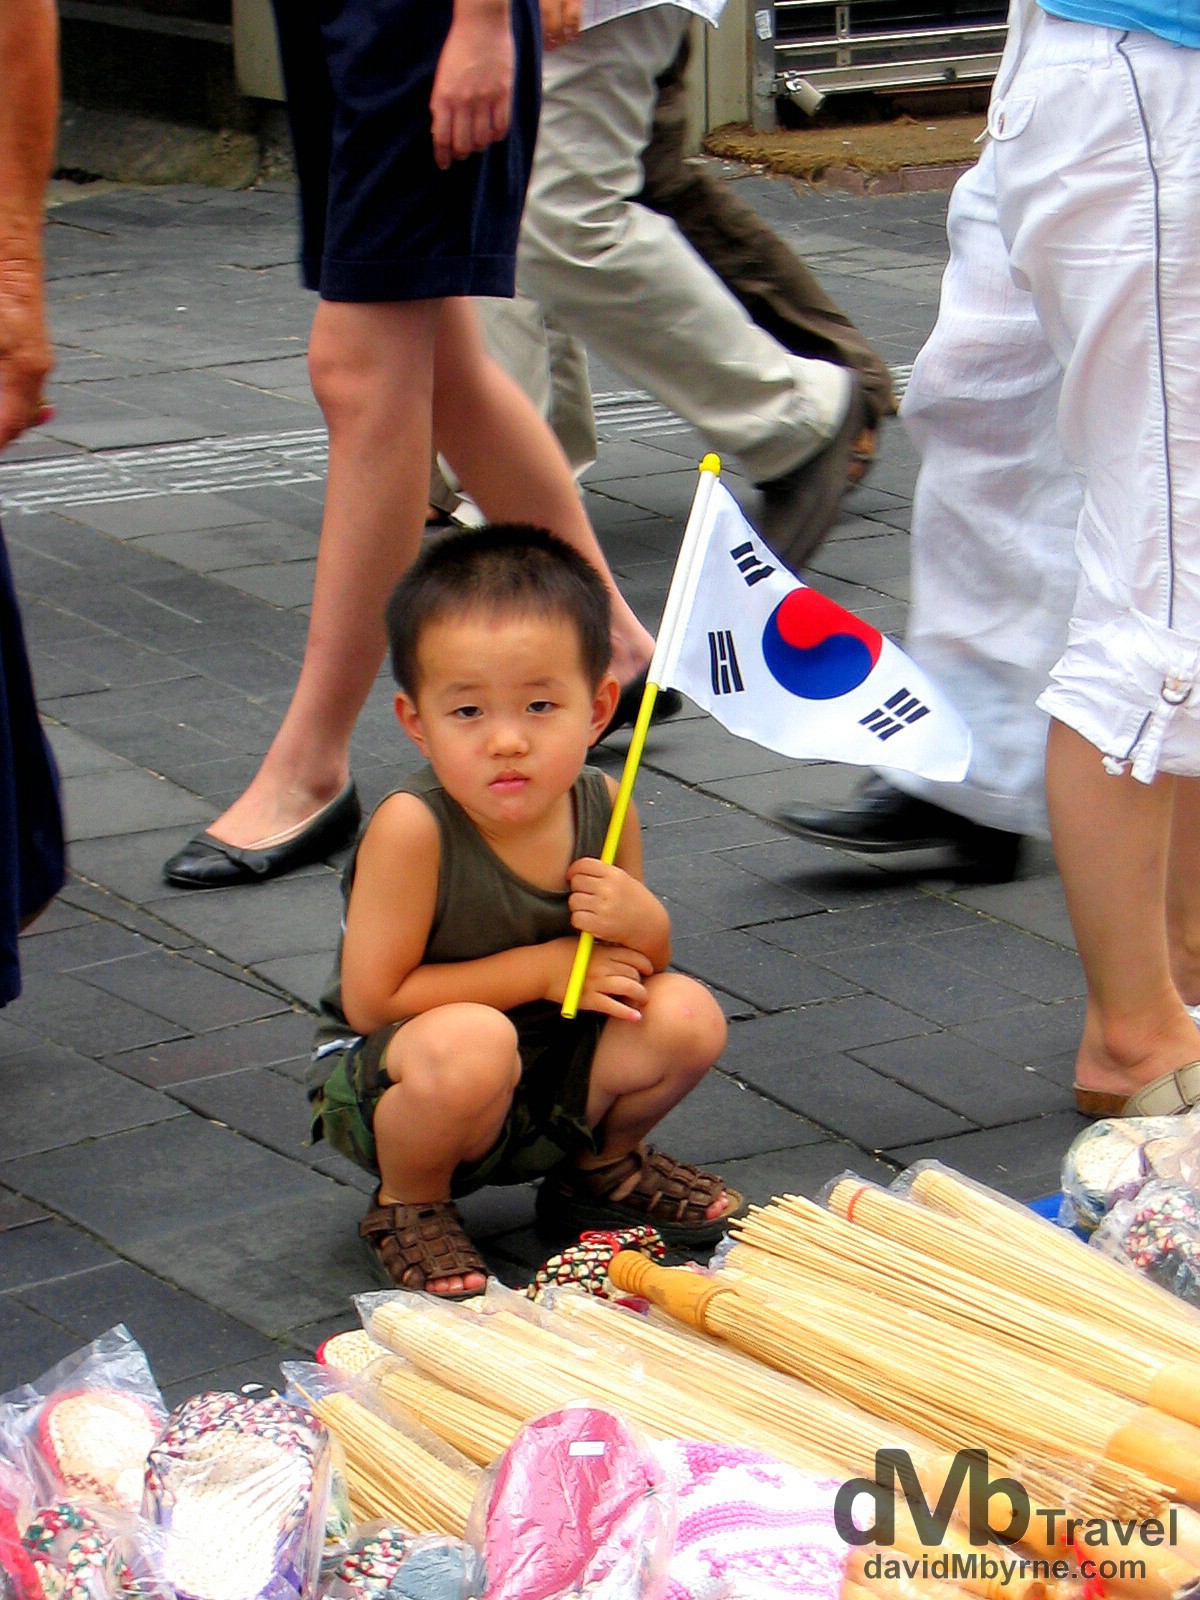 A young flag-bearer in Insadong, Seoul, South Korea, on Korean Independence Day. August 15th 2004